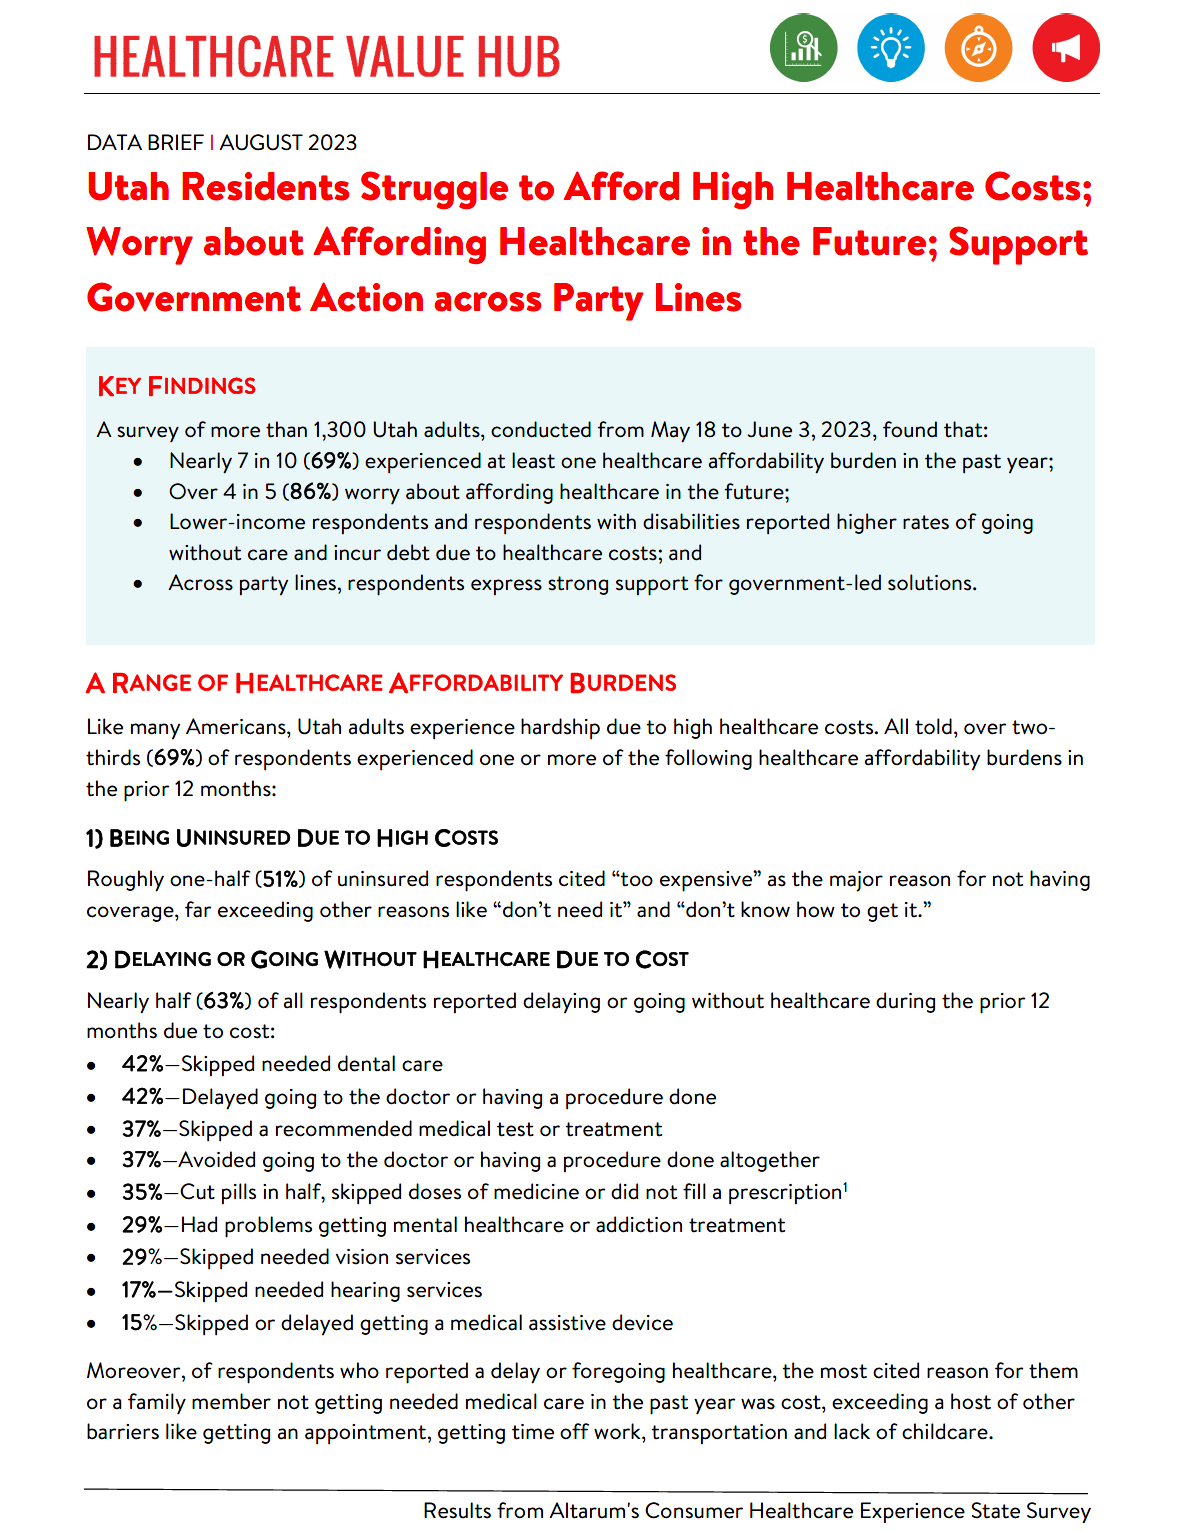 Utah Residents Struggle to Afford High Healthcare Costs_Affordability cover.png